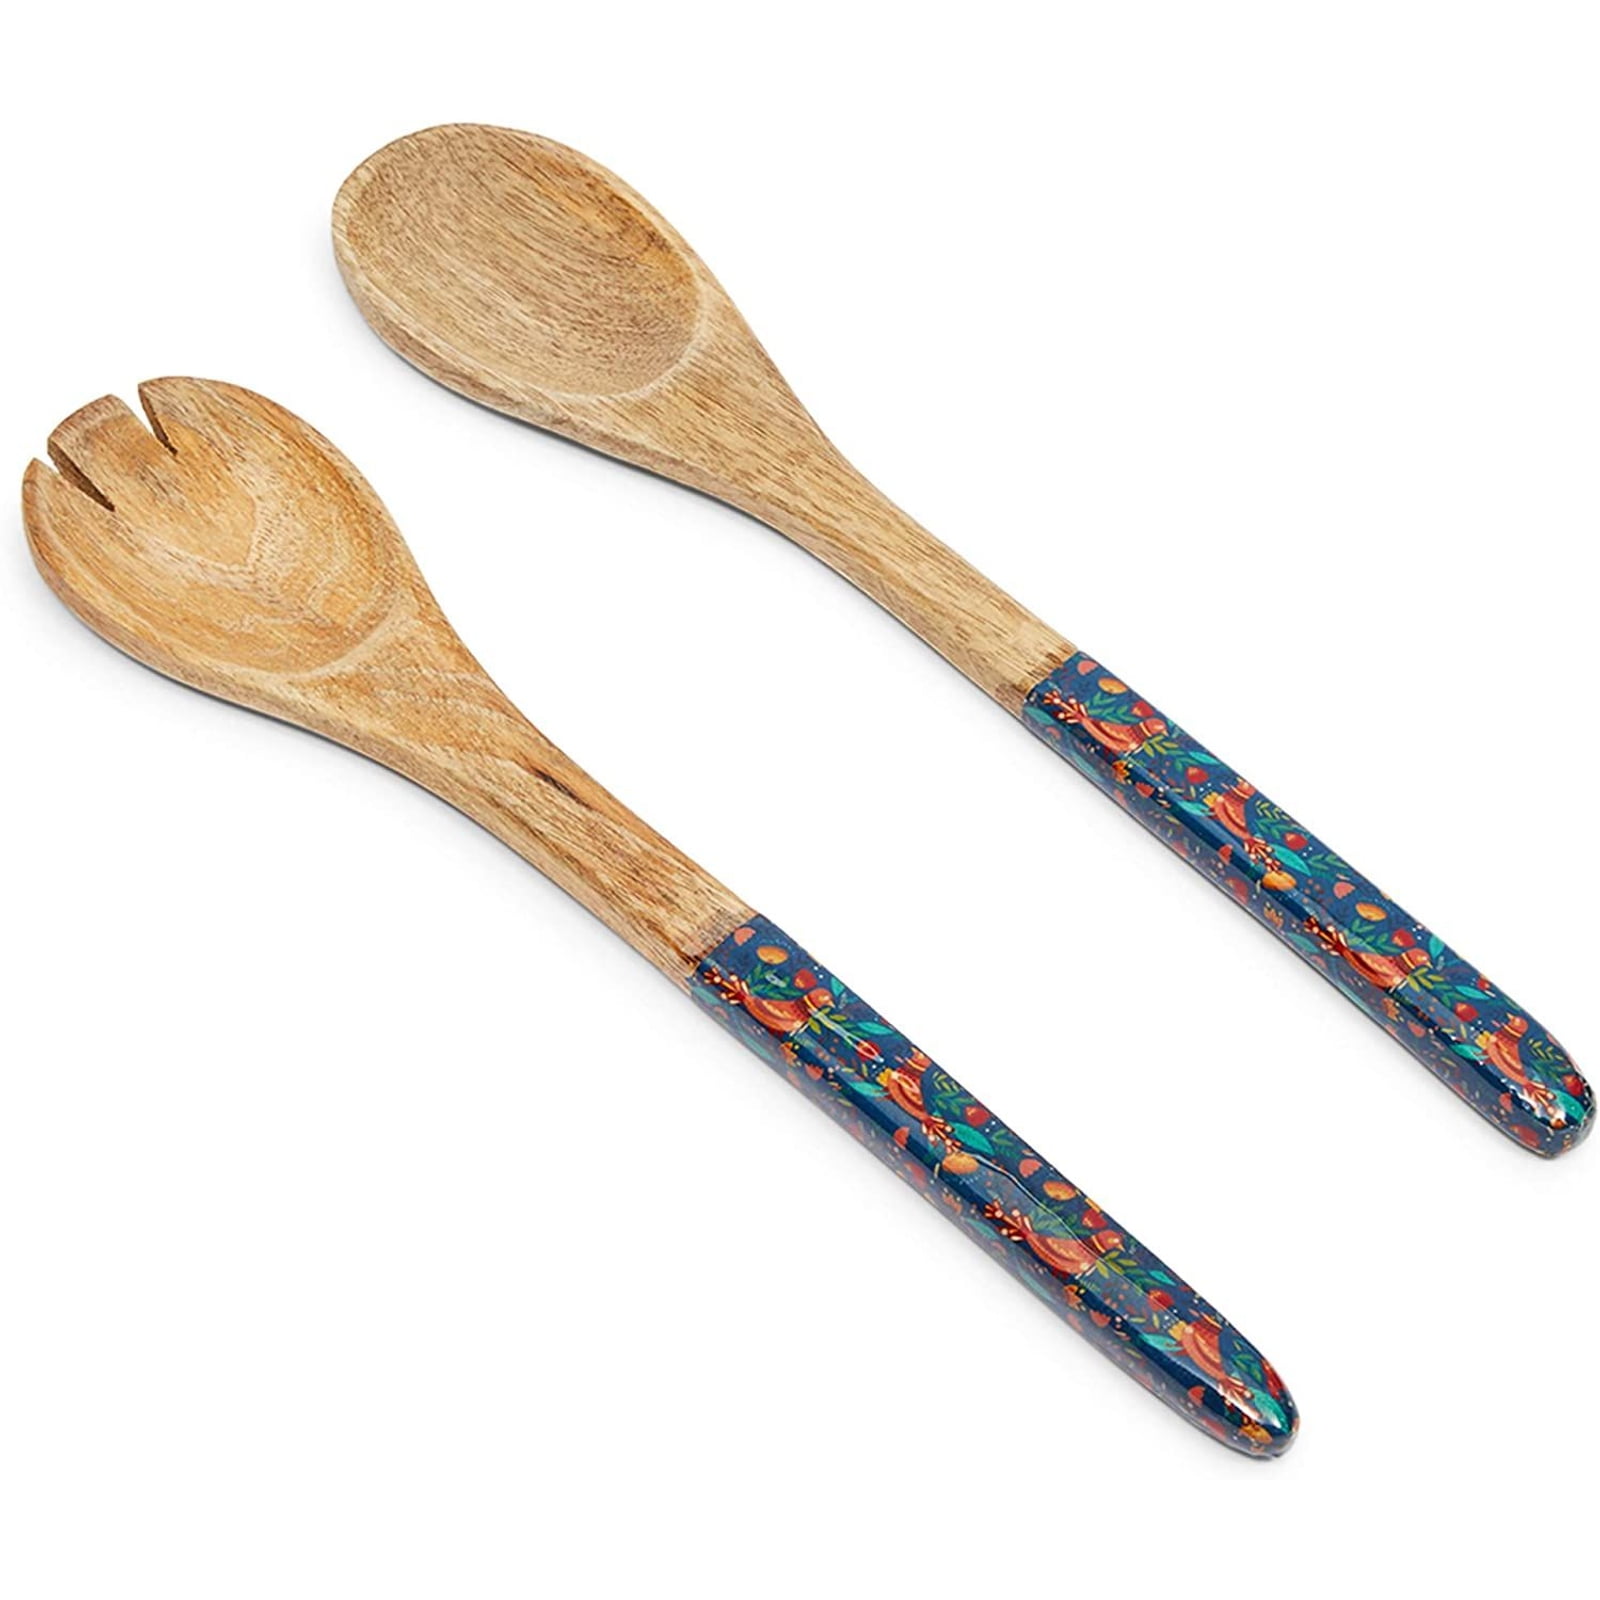 NEW Wooden Salad Serving Spoon And Fork Set Appx 12" long